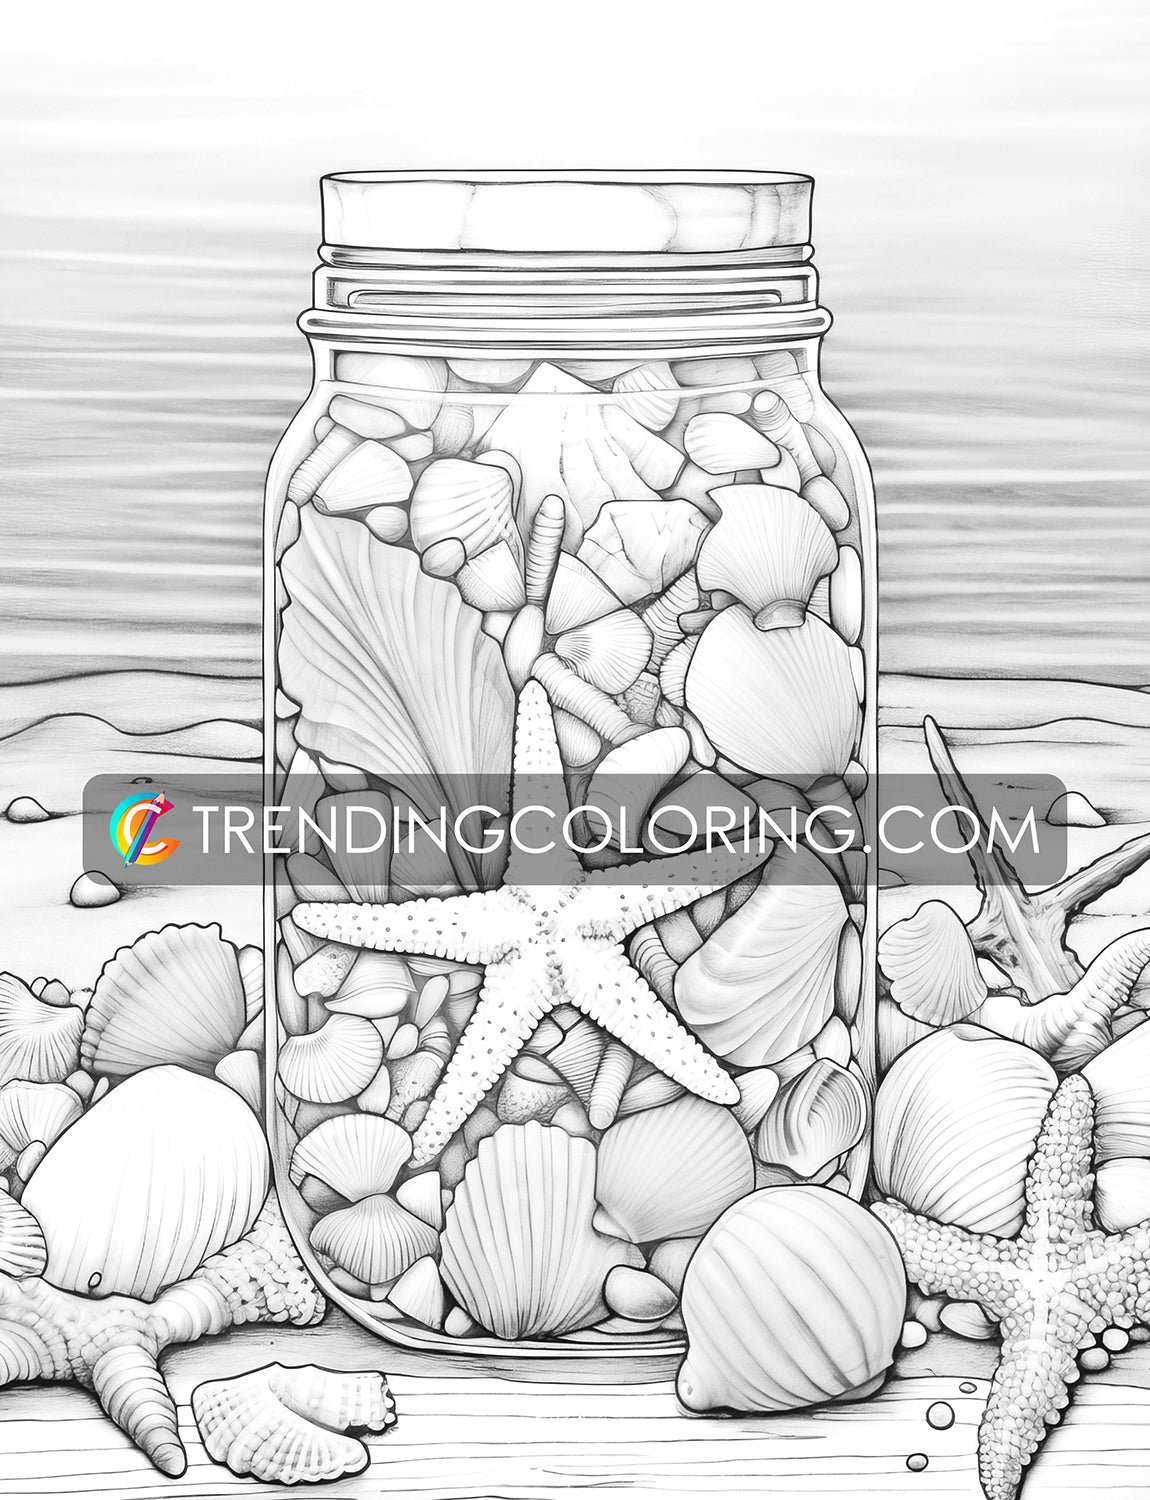 25 Ocean In Jar Grayscale Coloring Pages - Instant Download - Printable PDF Dark/Light